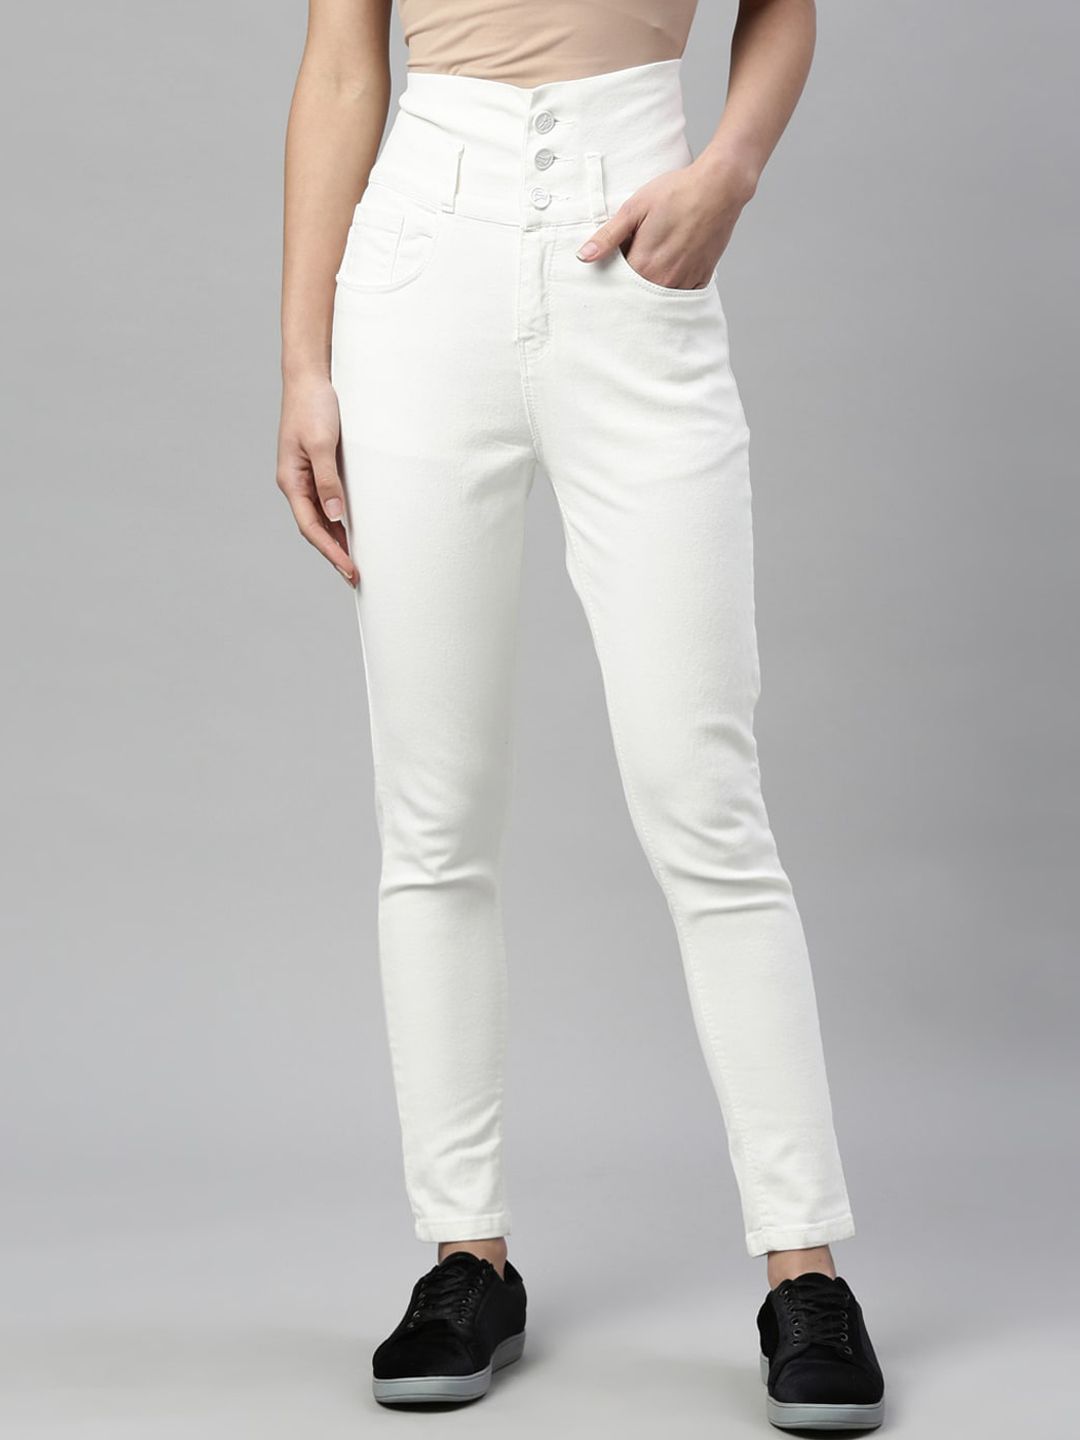 ZHEIA Women White Lean Skinny Fit High-Rise Stretchable Jeans Price in India